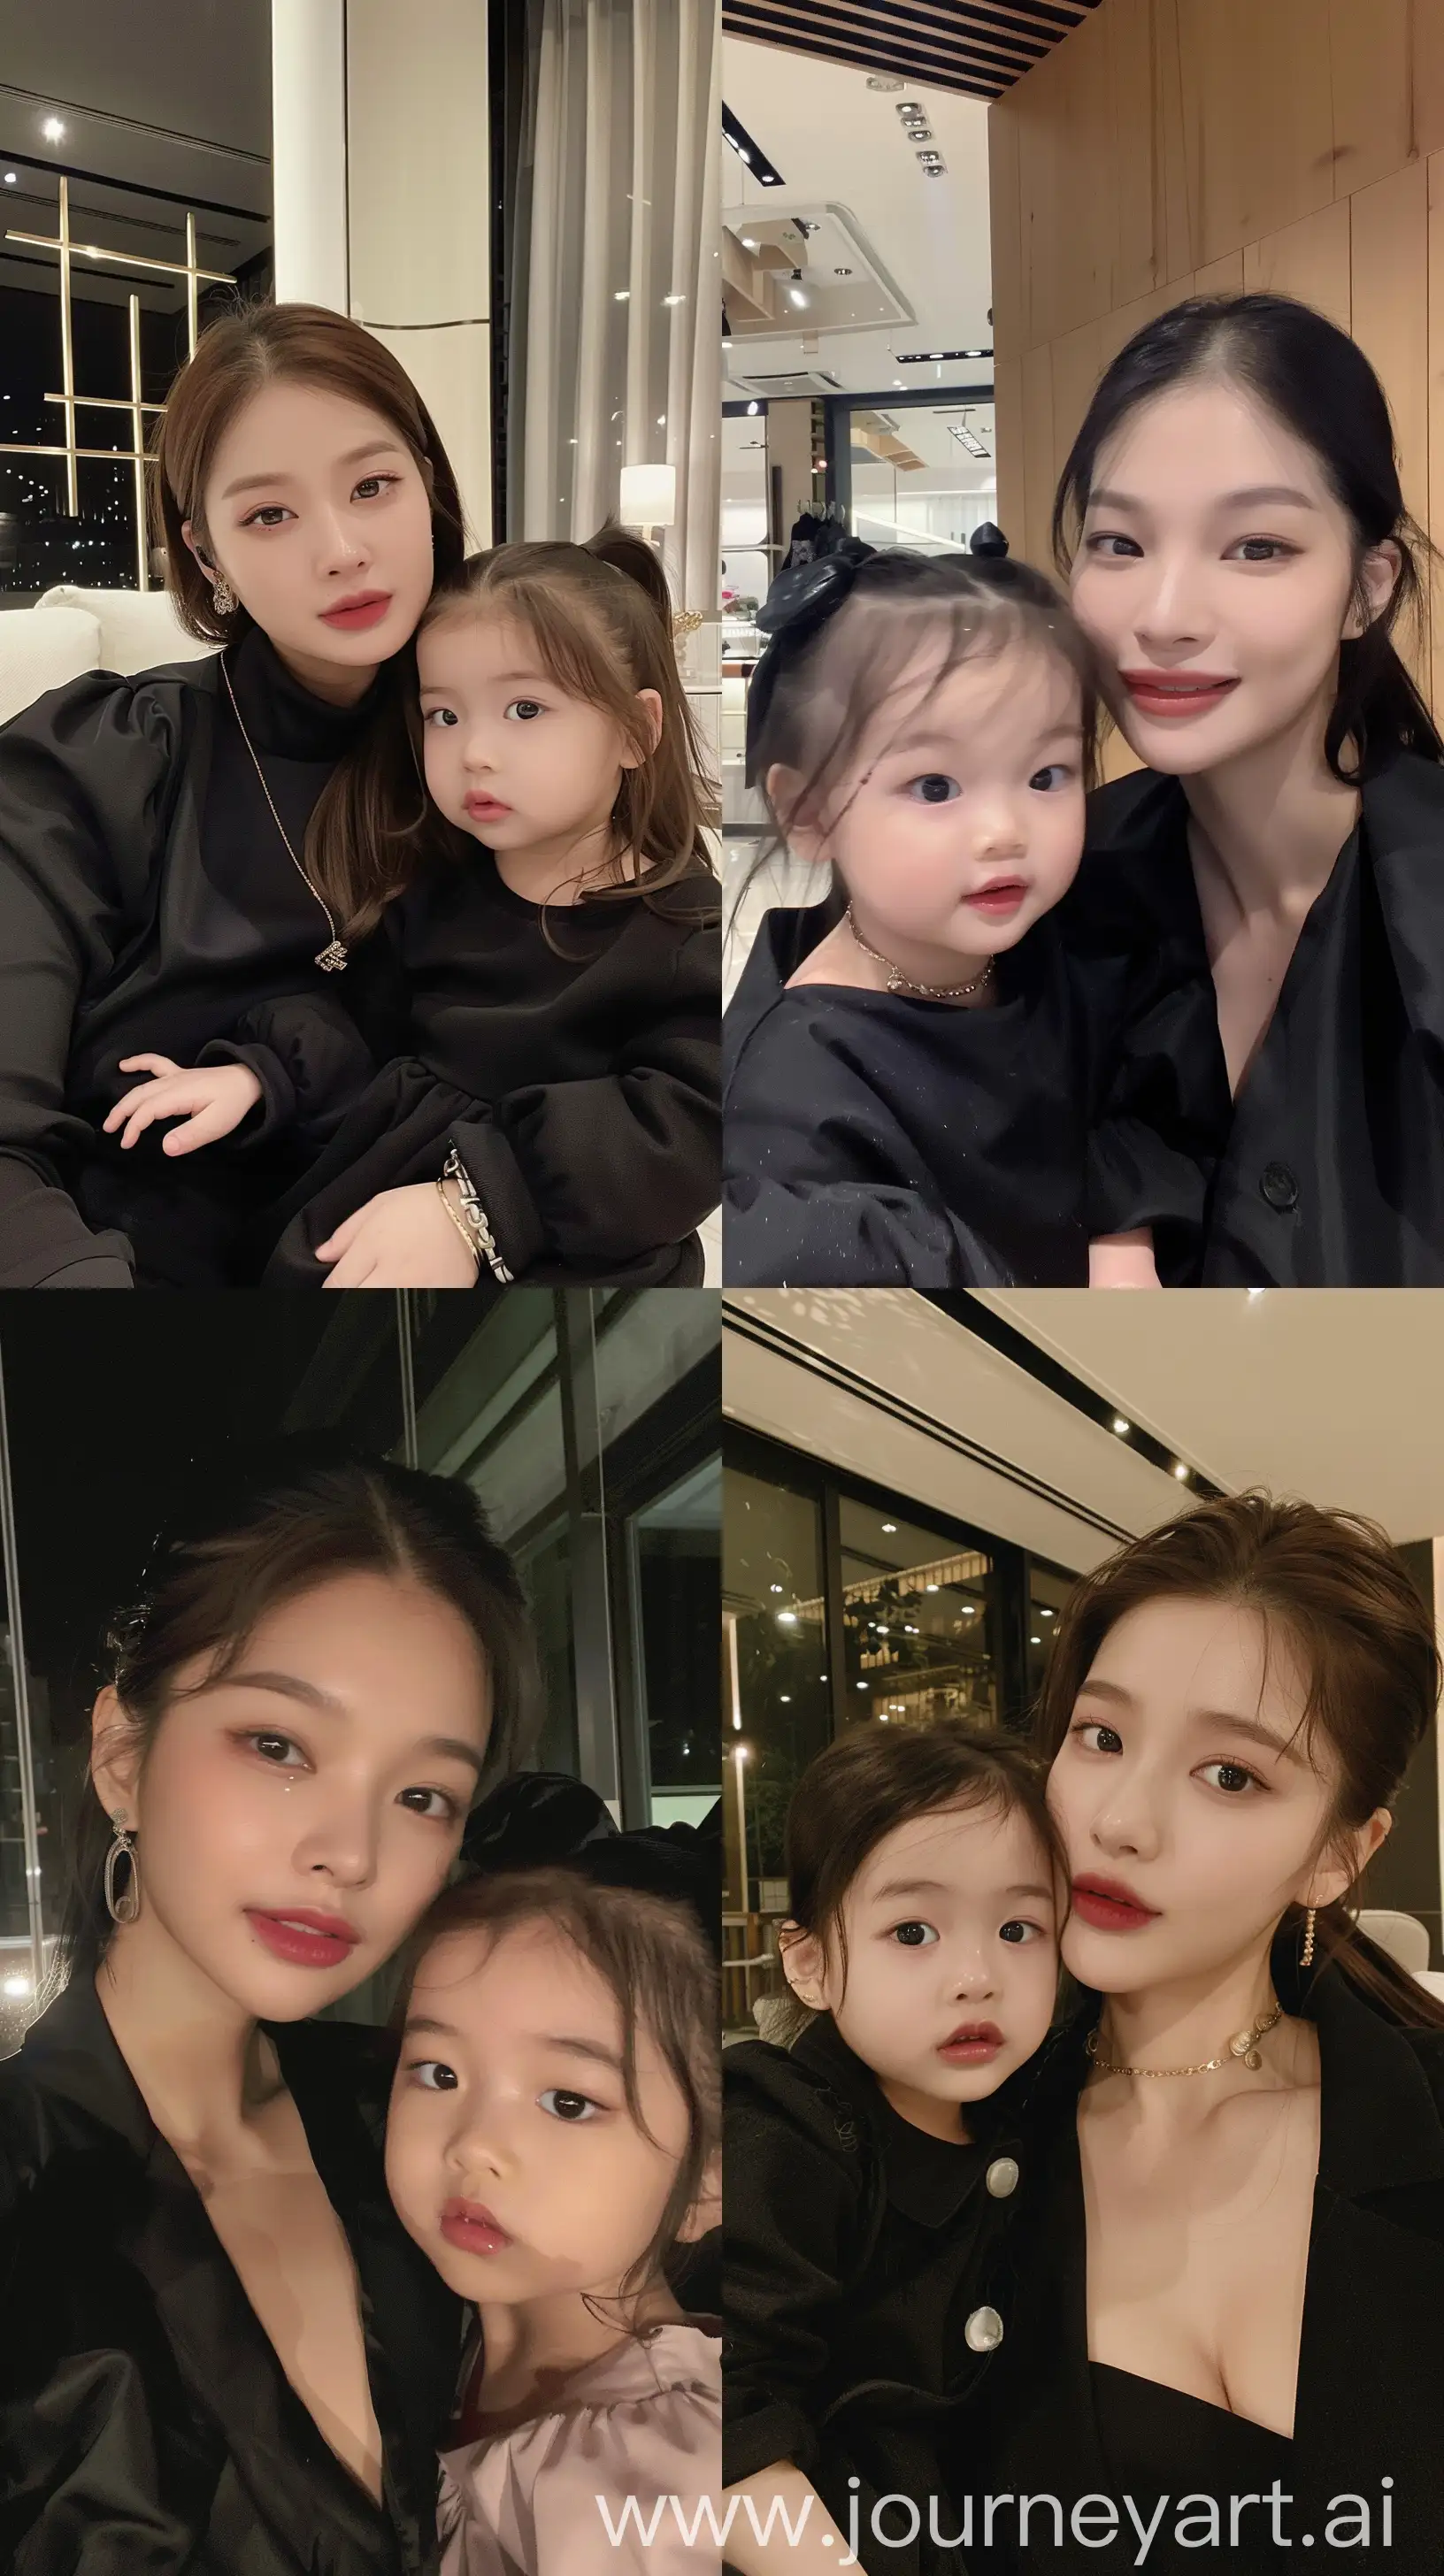 blackpink's jennie selfie with 2 years old  girl, facial feature look a like blackpink's jennie, aestethic selfie, wearing black outfit, night times, aestethic make up,hotly elegant young mom,masterpiece --ar 9:16